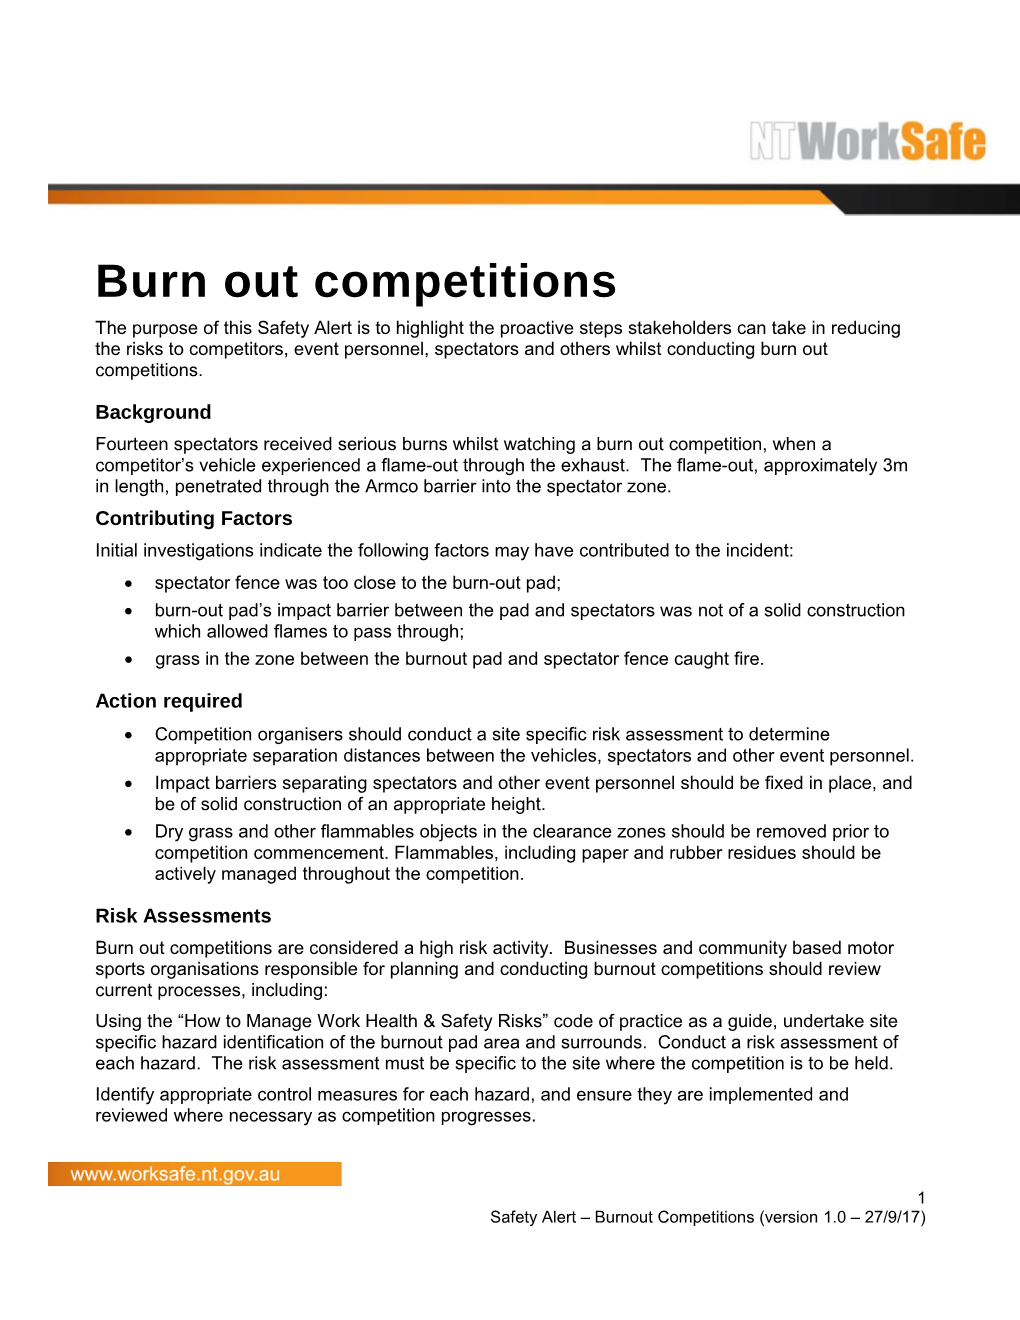 Safety Alert - Burn out Competitions